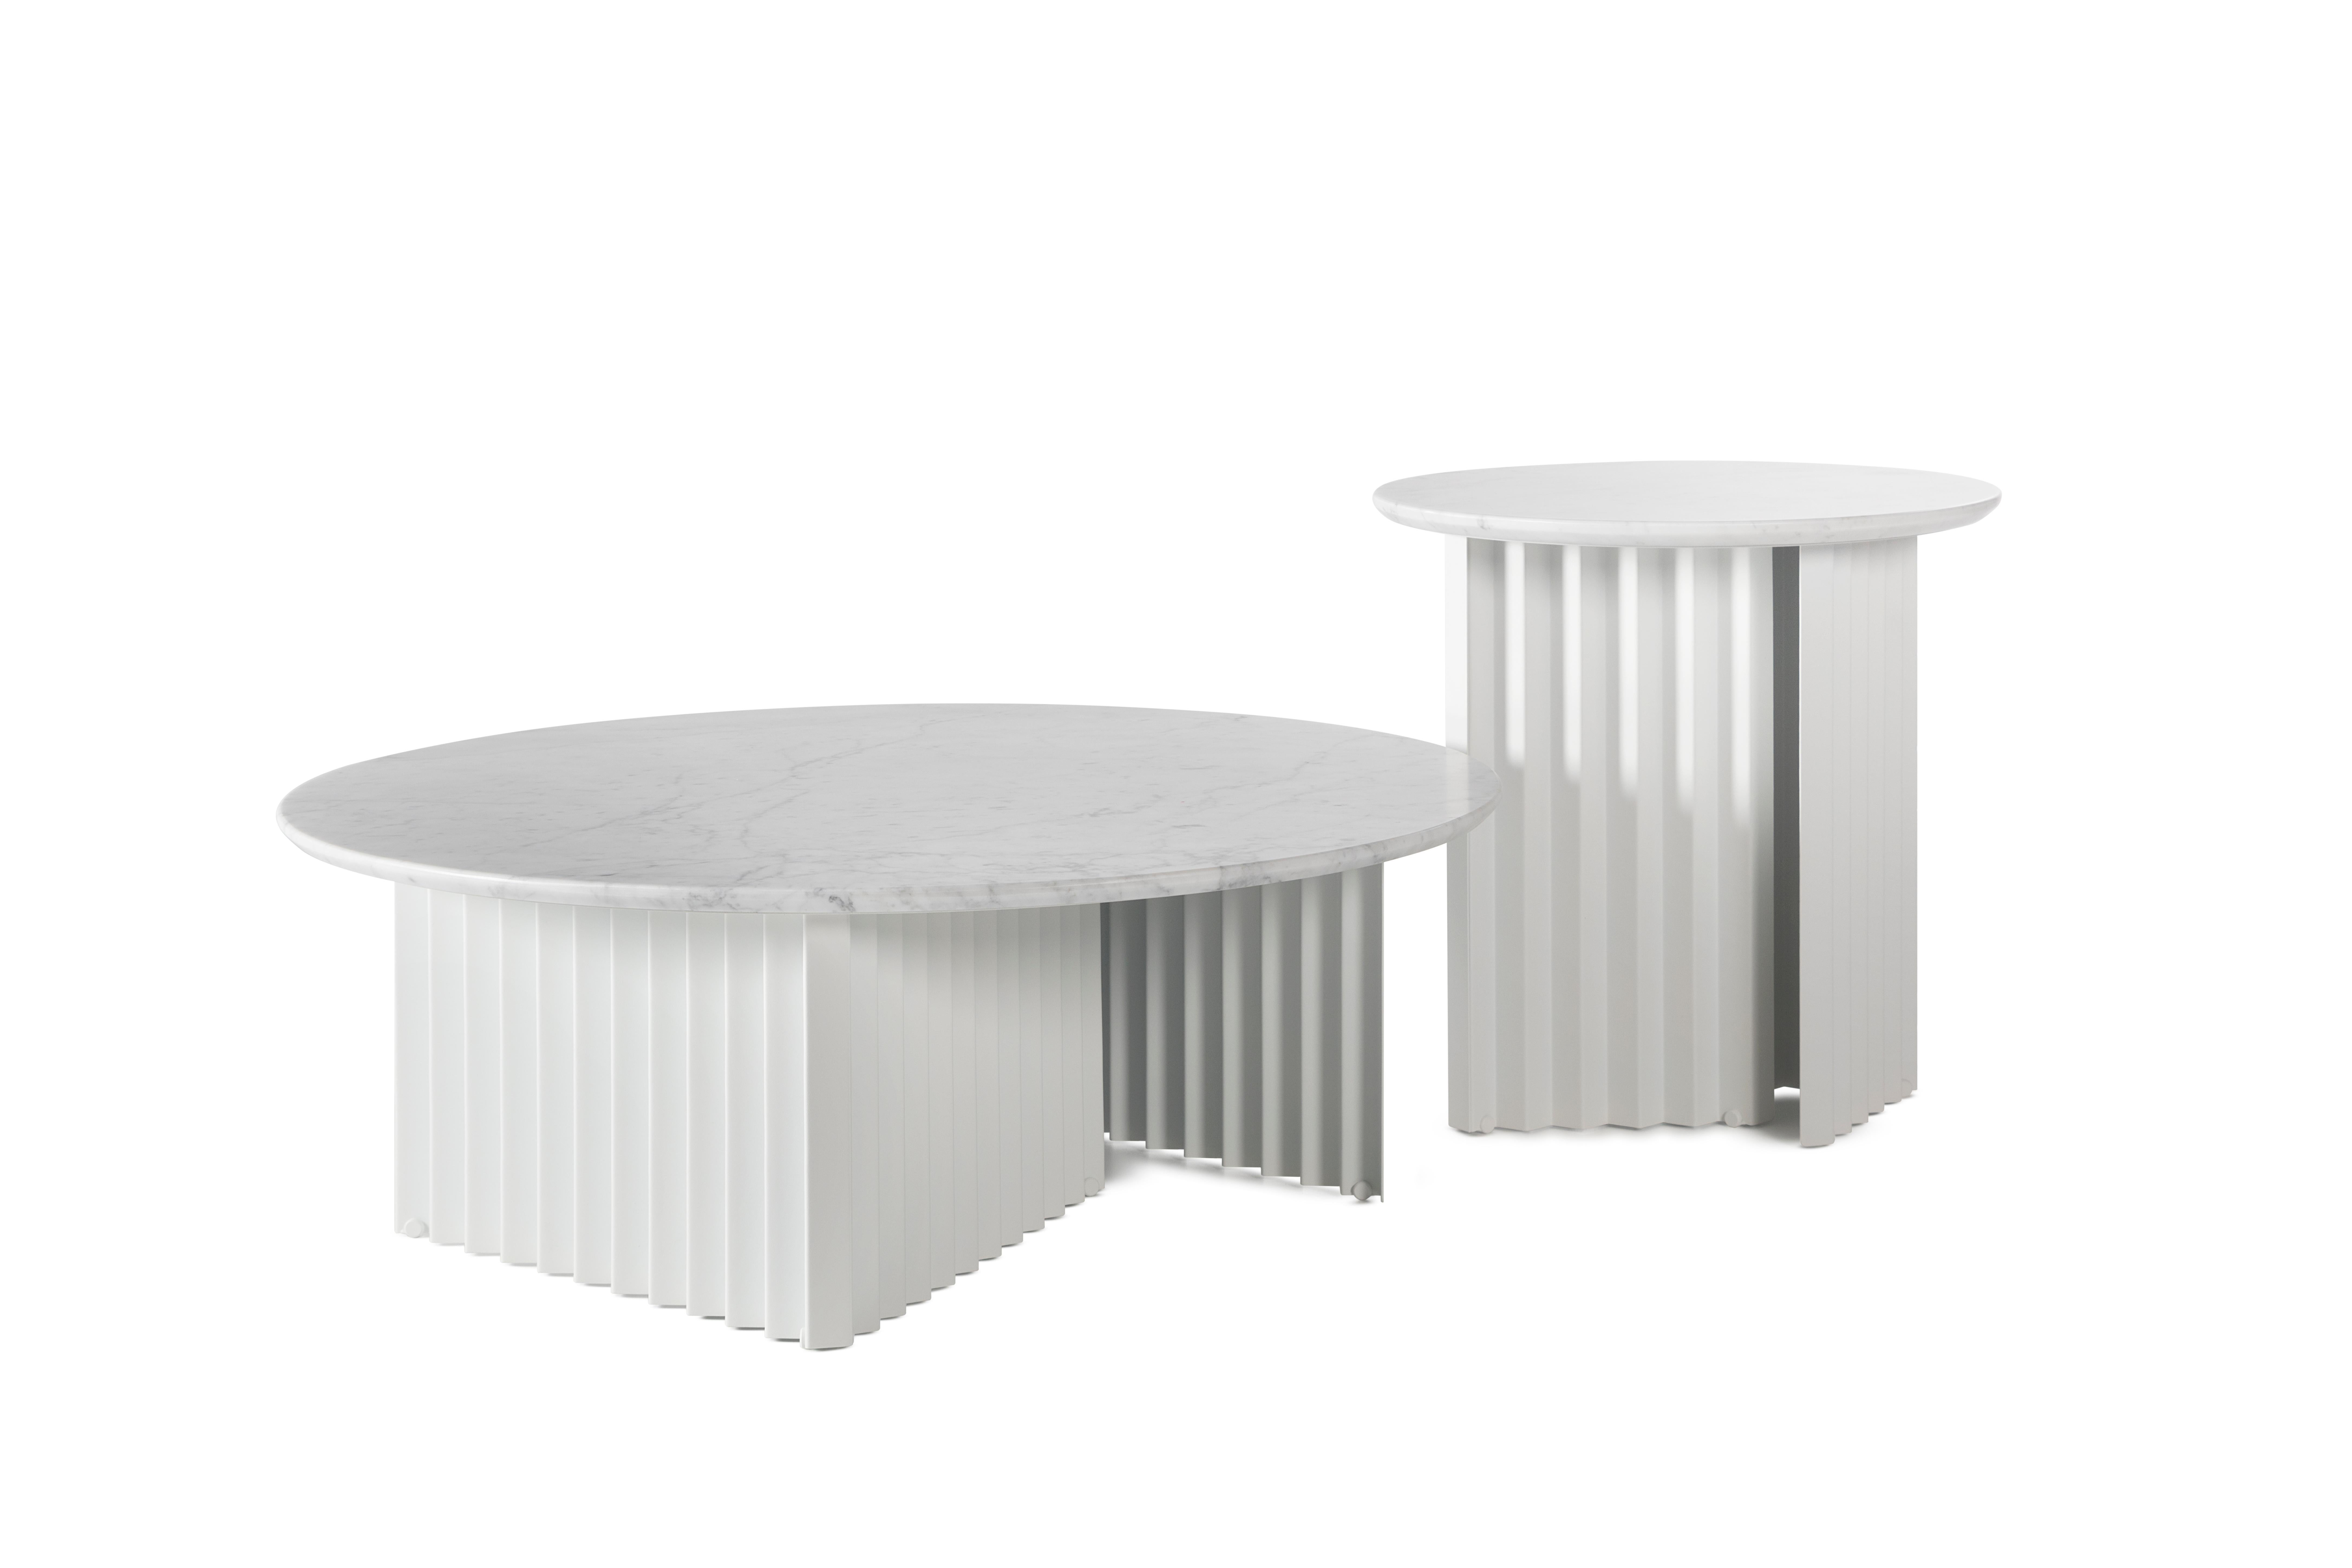 Modern RS Barcelona Plec Round Small Table in White Metal by A.P.O. For Sale